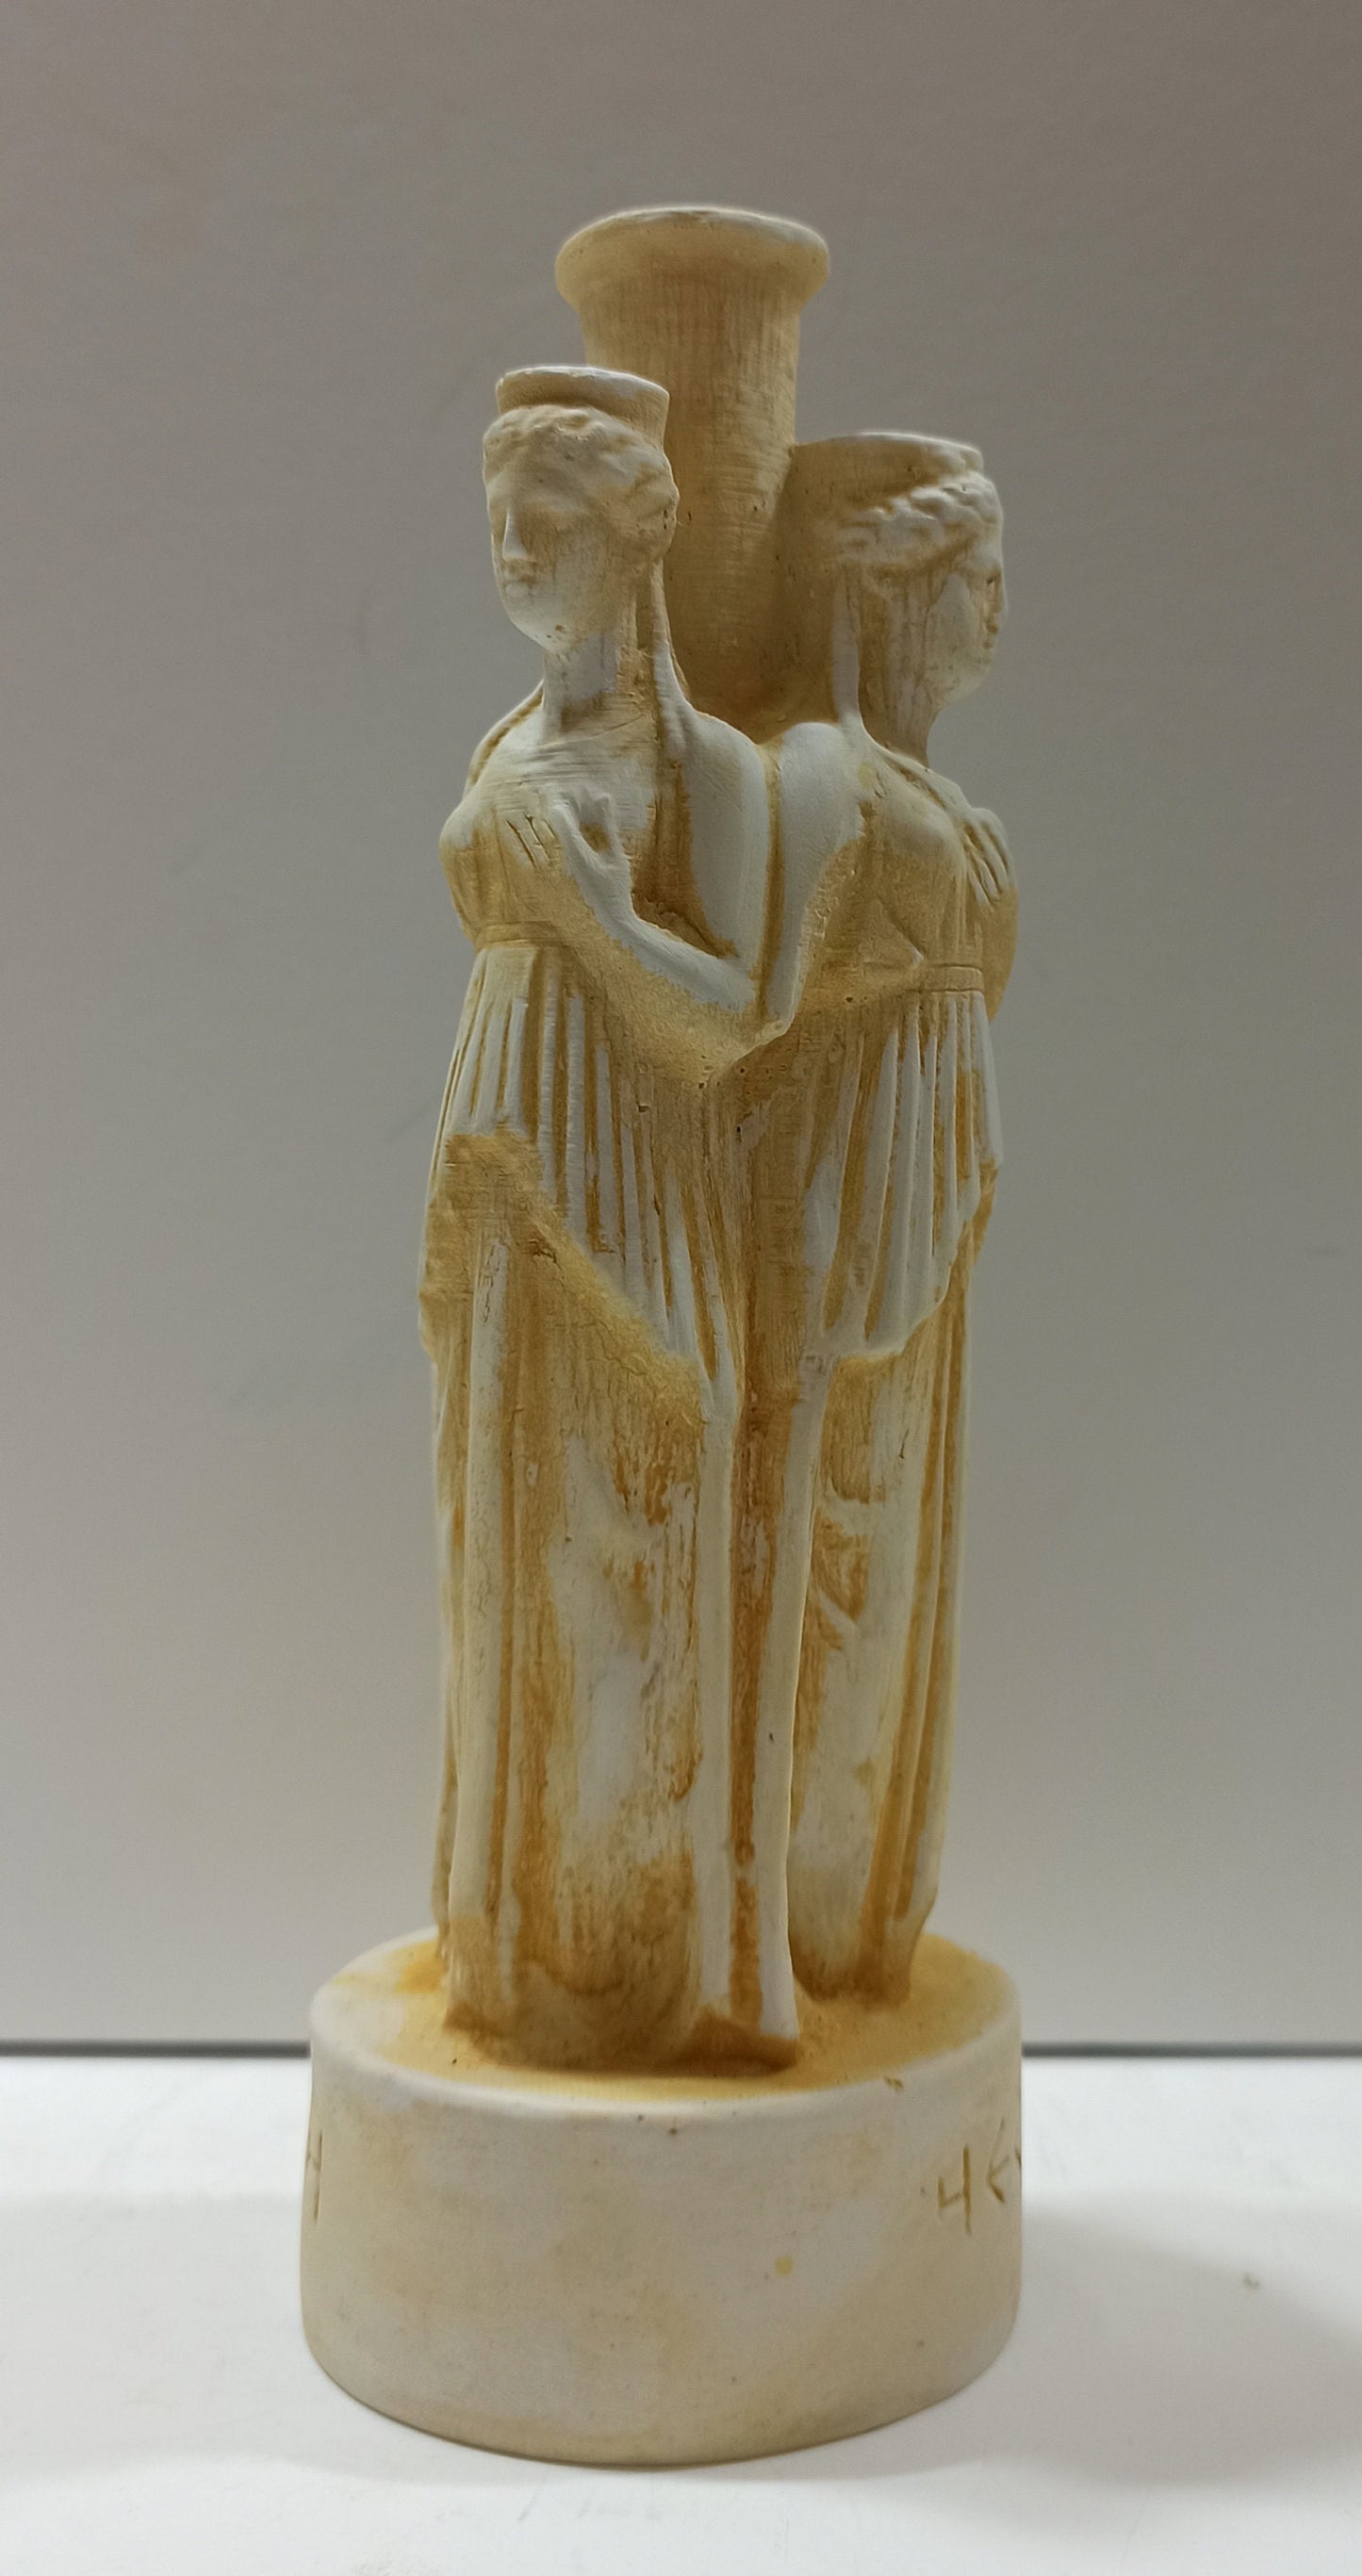 Hecate Hekate - Ancient Greek Goddess of Magic, Witchcraft, the Night, Moon, Ghosts and Necromancy - Museum Reproduction - Casting Stone